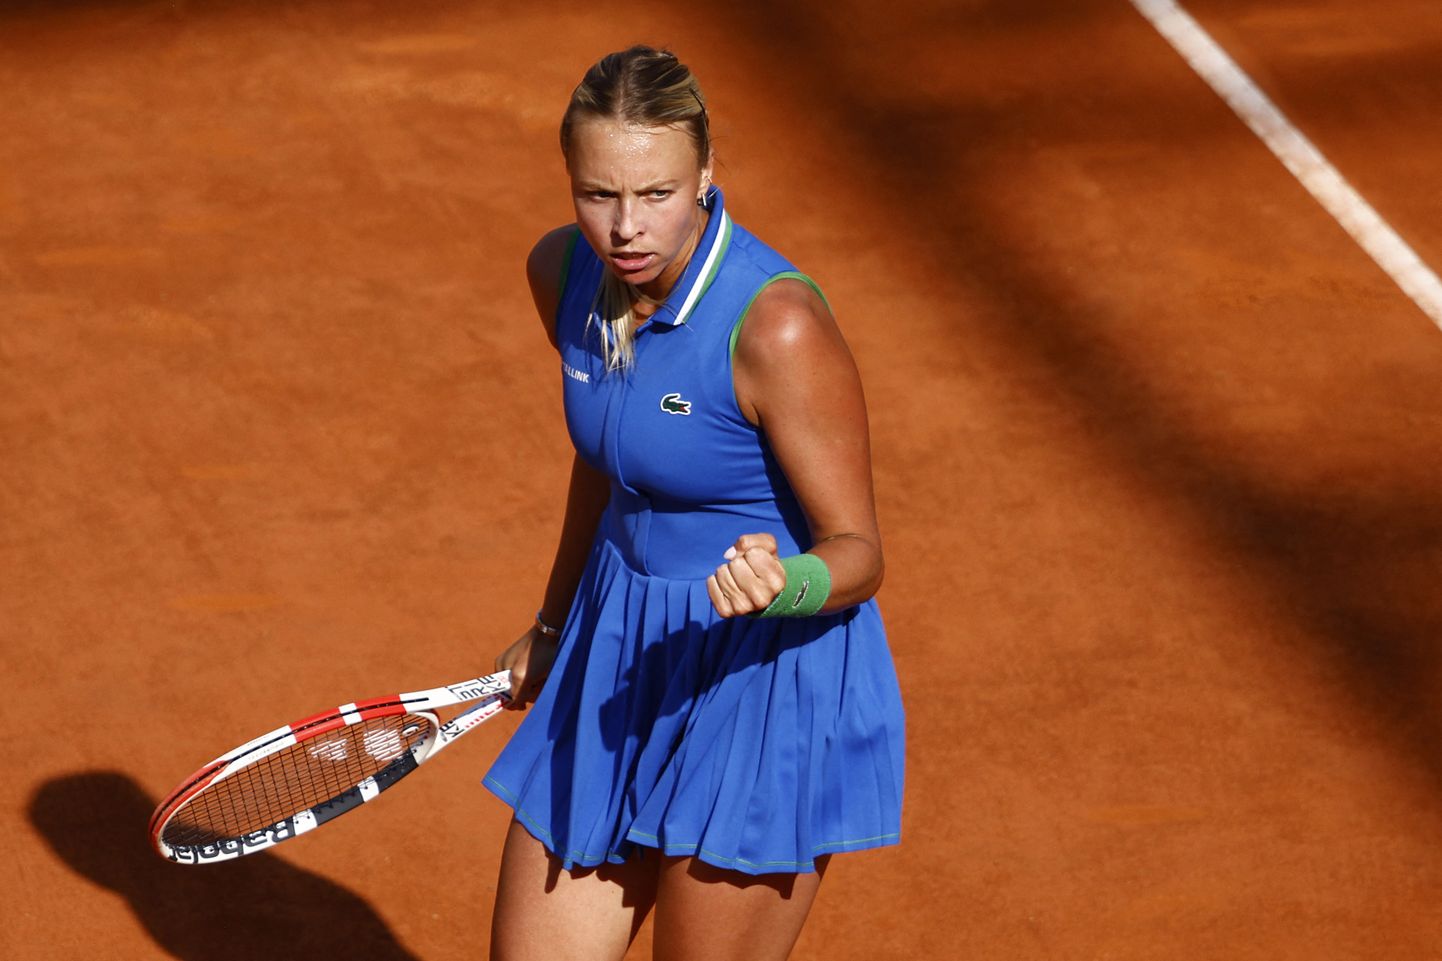 Tennis - Italian Open - Foro Italico, Rome, Italy - May 9, 2023
Estonia's Anett Kontaveit reacts during her round of 128 match against Alycia Parks of the U.S. REUTERS/Guglielmo Mangiapane